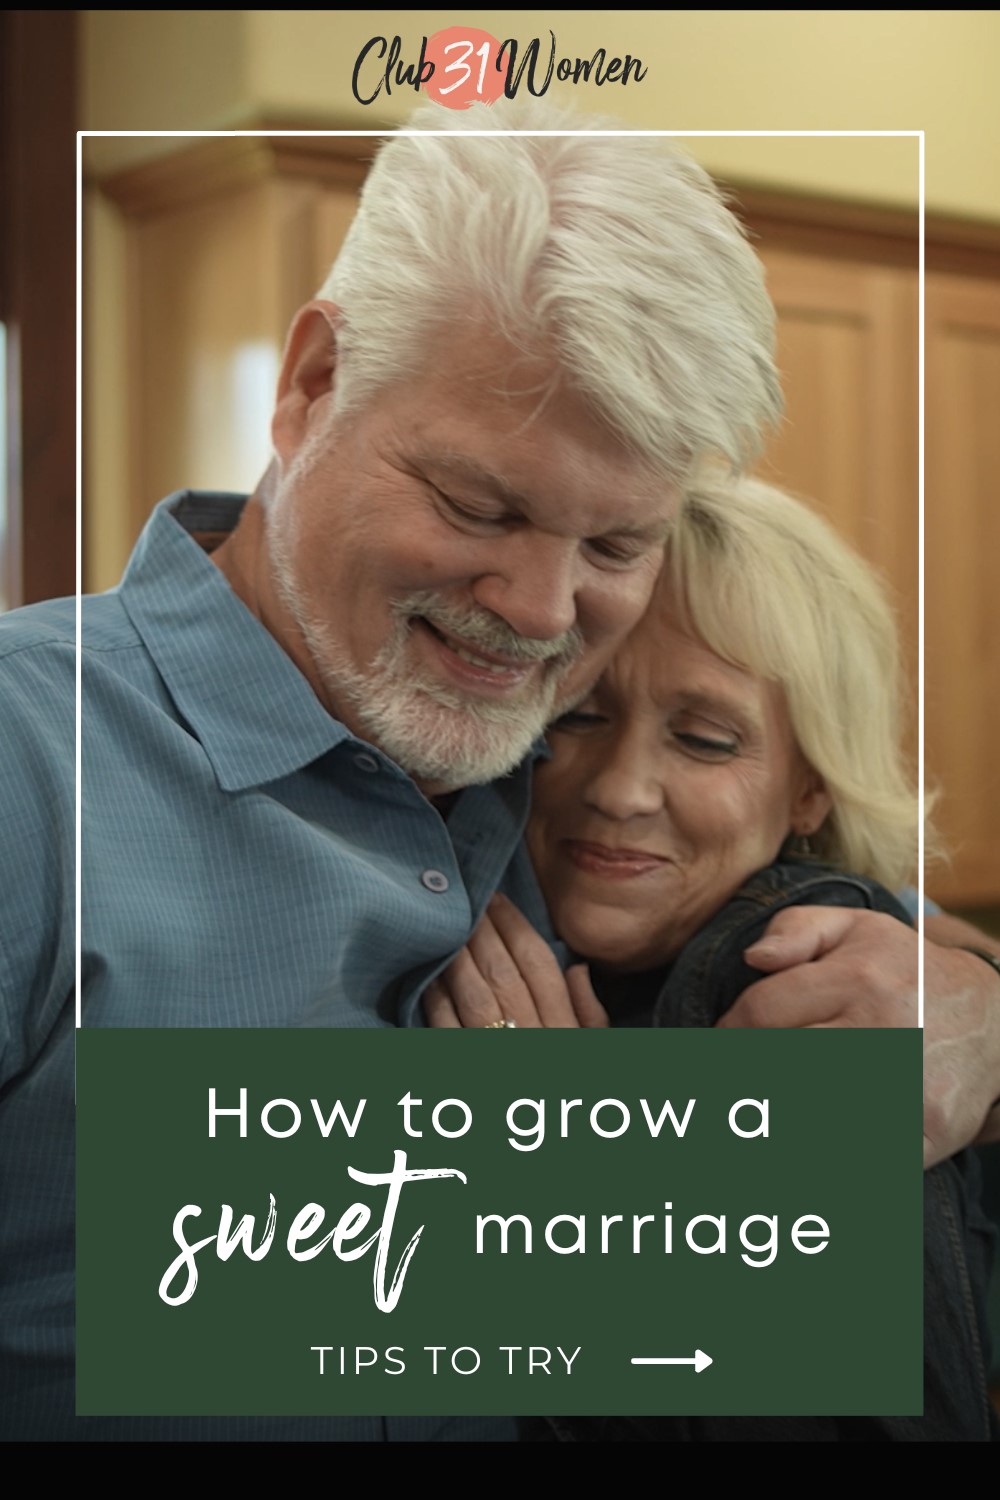 Would you like to build a sweet marriage? No matter where your relationship is at, here is a simple, but powerful way you can start right now! via @Club31Women